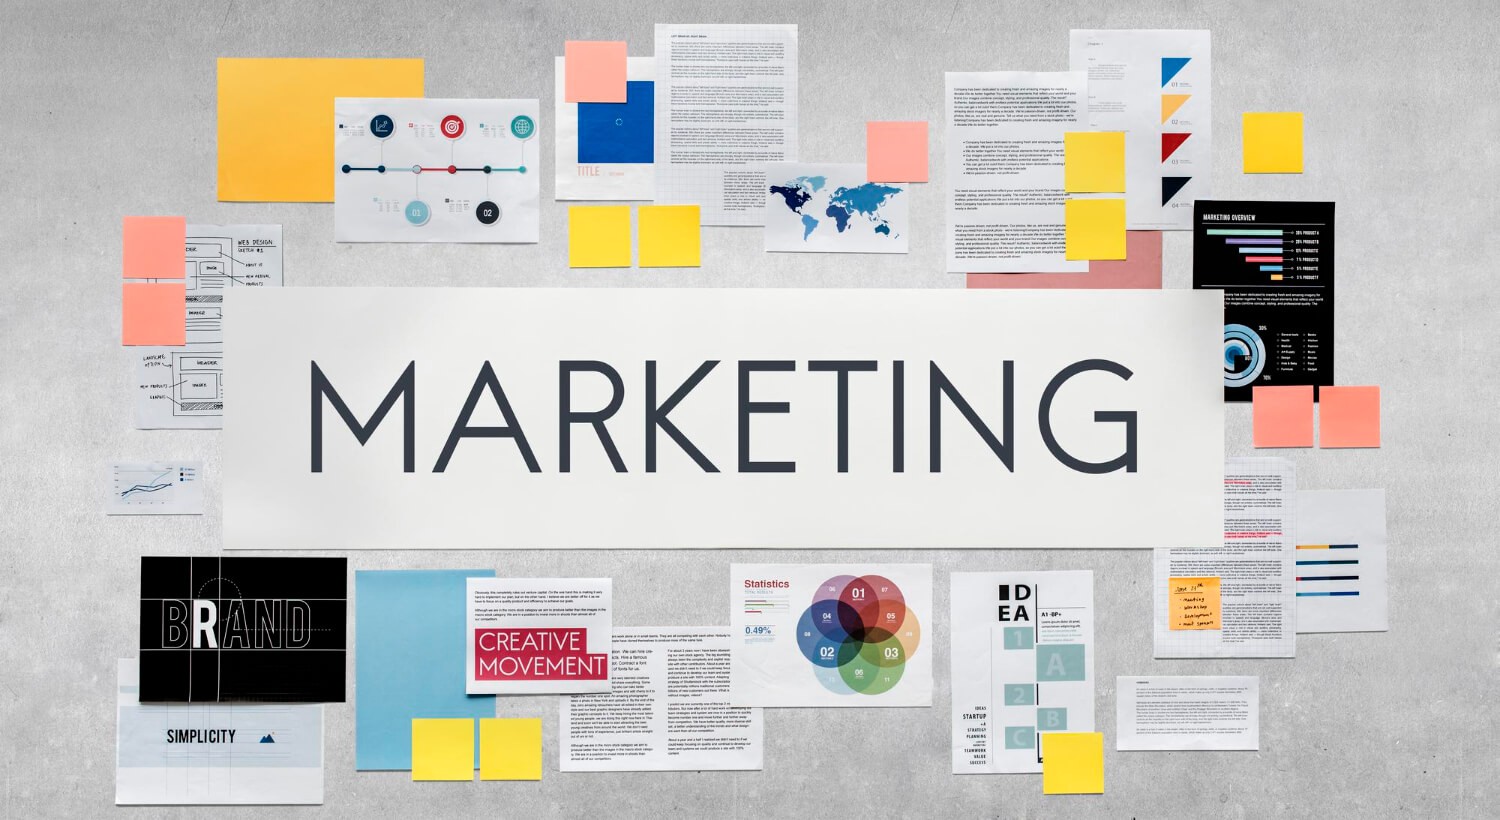 Welcome to the Marketing blog!